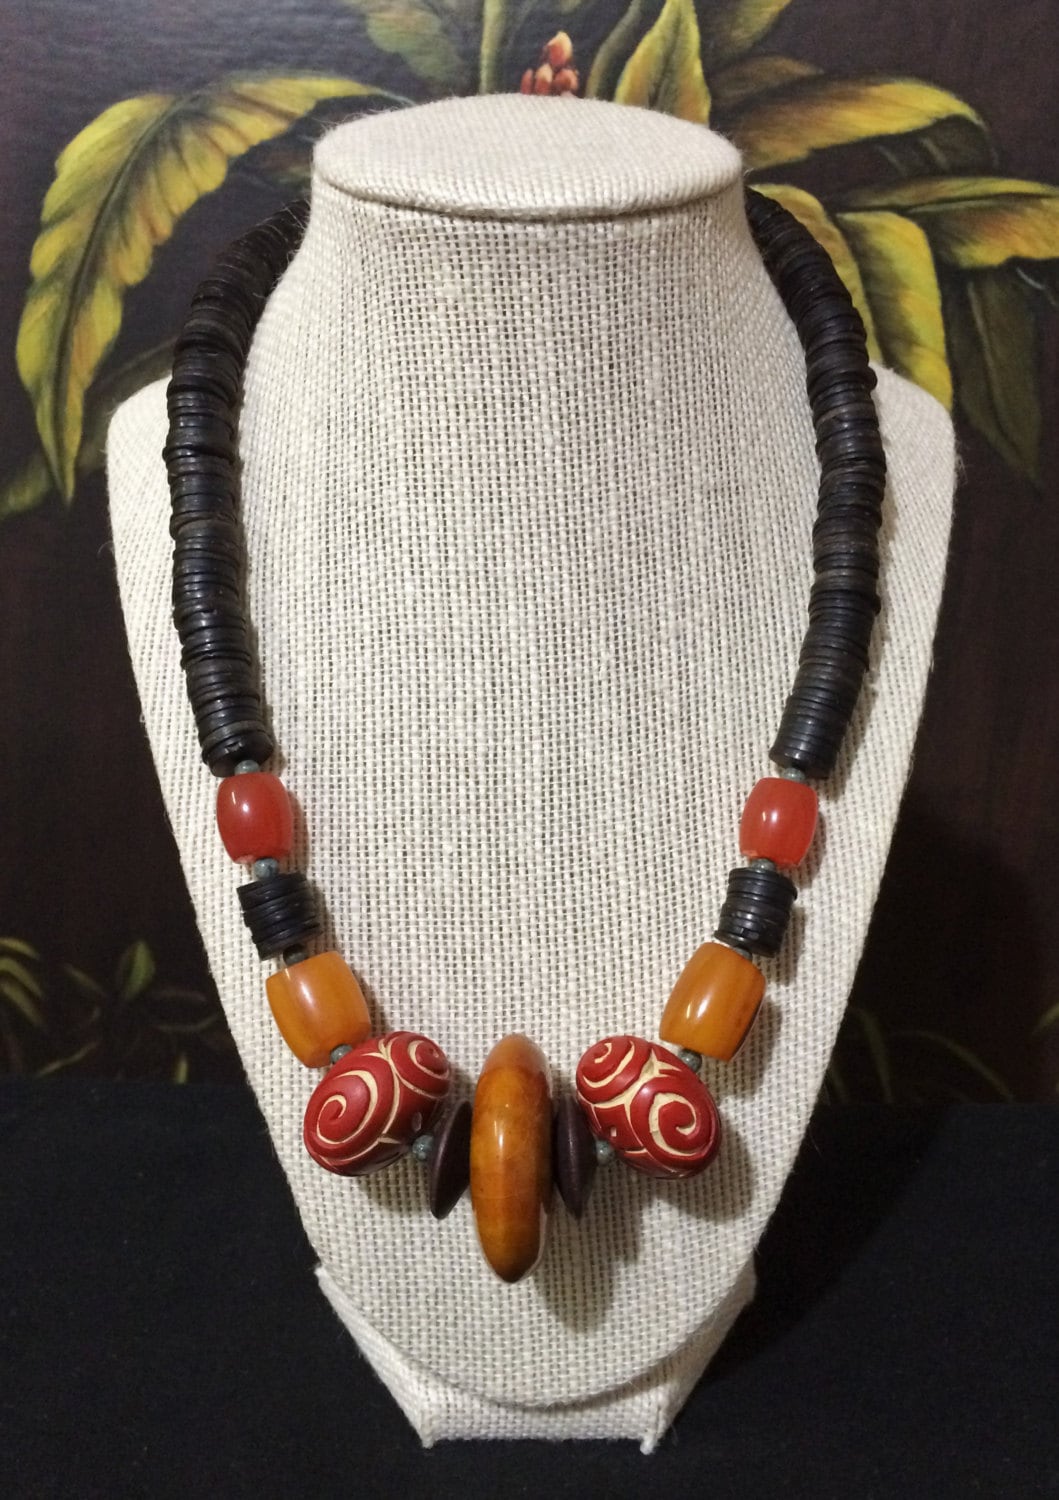 African Trade Bead Necklace. by SharkReefDesign on Etsy